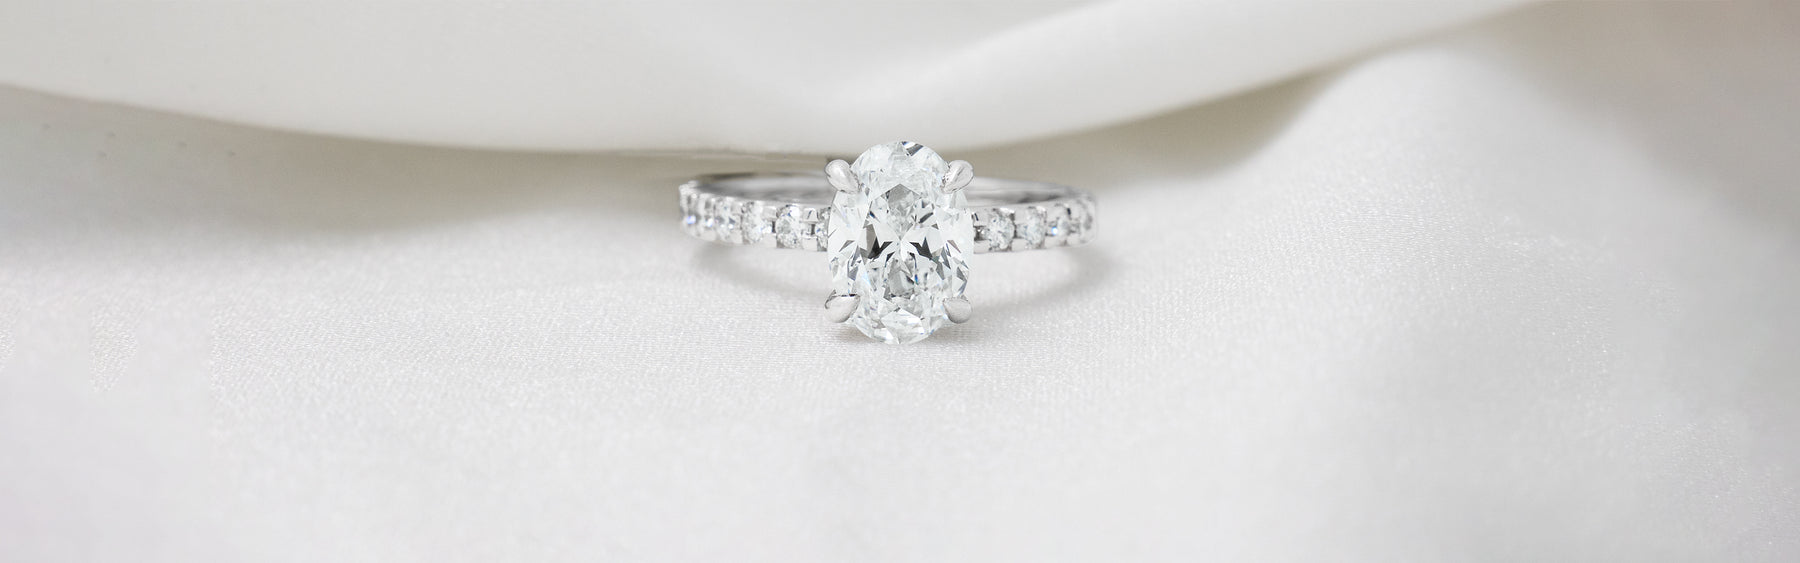 Diamond Set Band Engagement Ring in platinum or 18ct gold